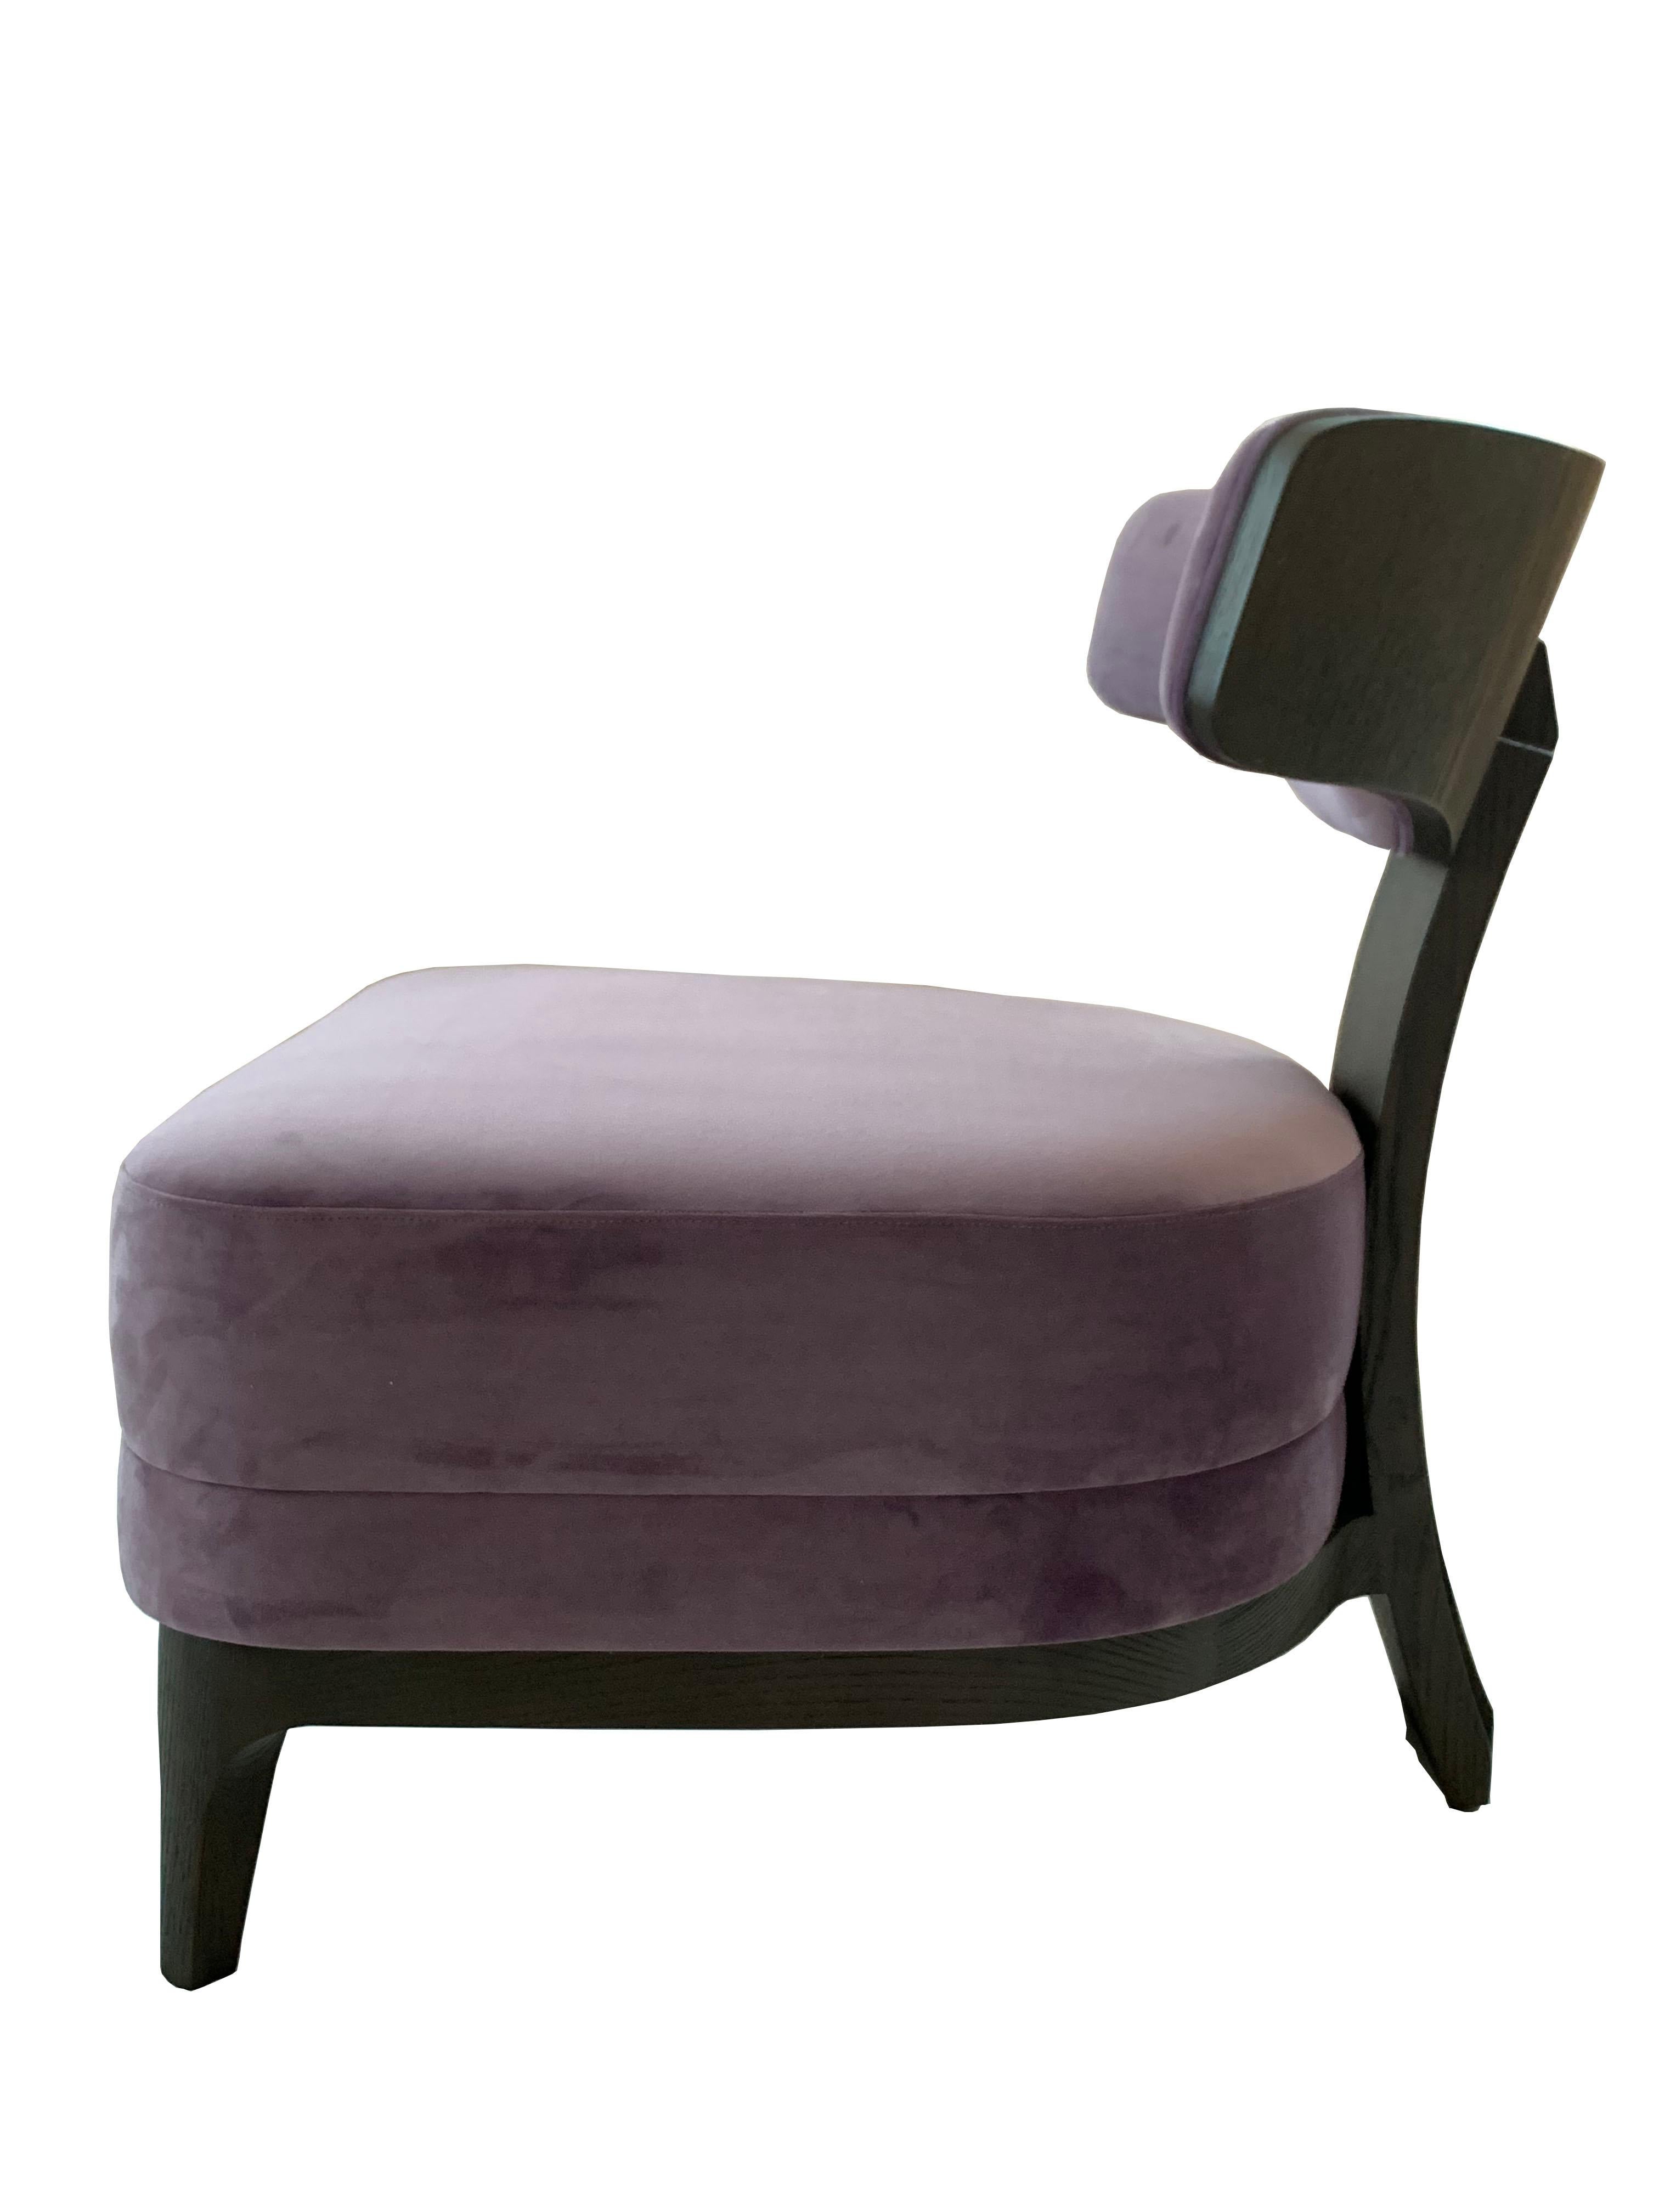 Upholstered lounge chair.
Velvet plum color fabric.
Solid oak and handmade.

Description: Lounge Chair
Color: Brown and Plum
Size: 68 x 71 x 73H cm
Material: Oak and Velvet
Collection: Mid Century Rhythm